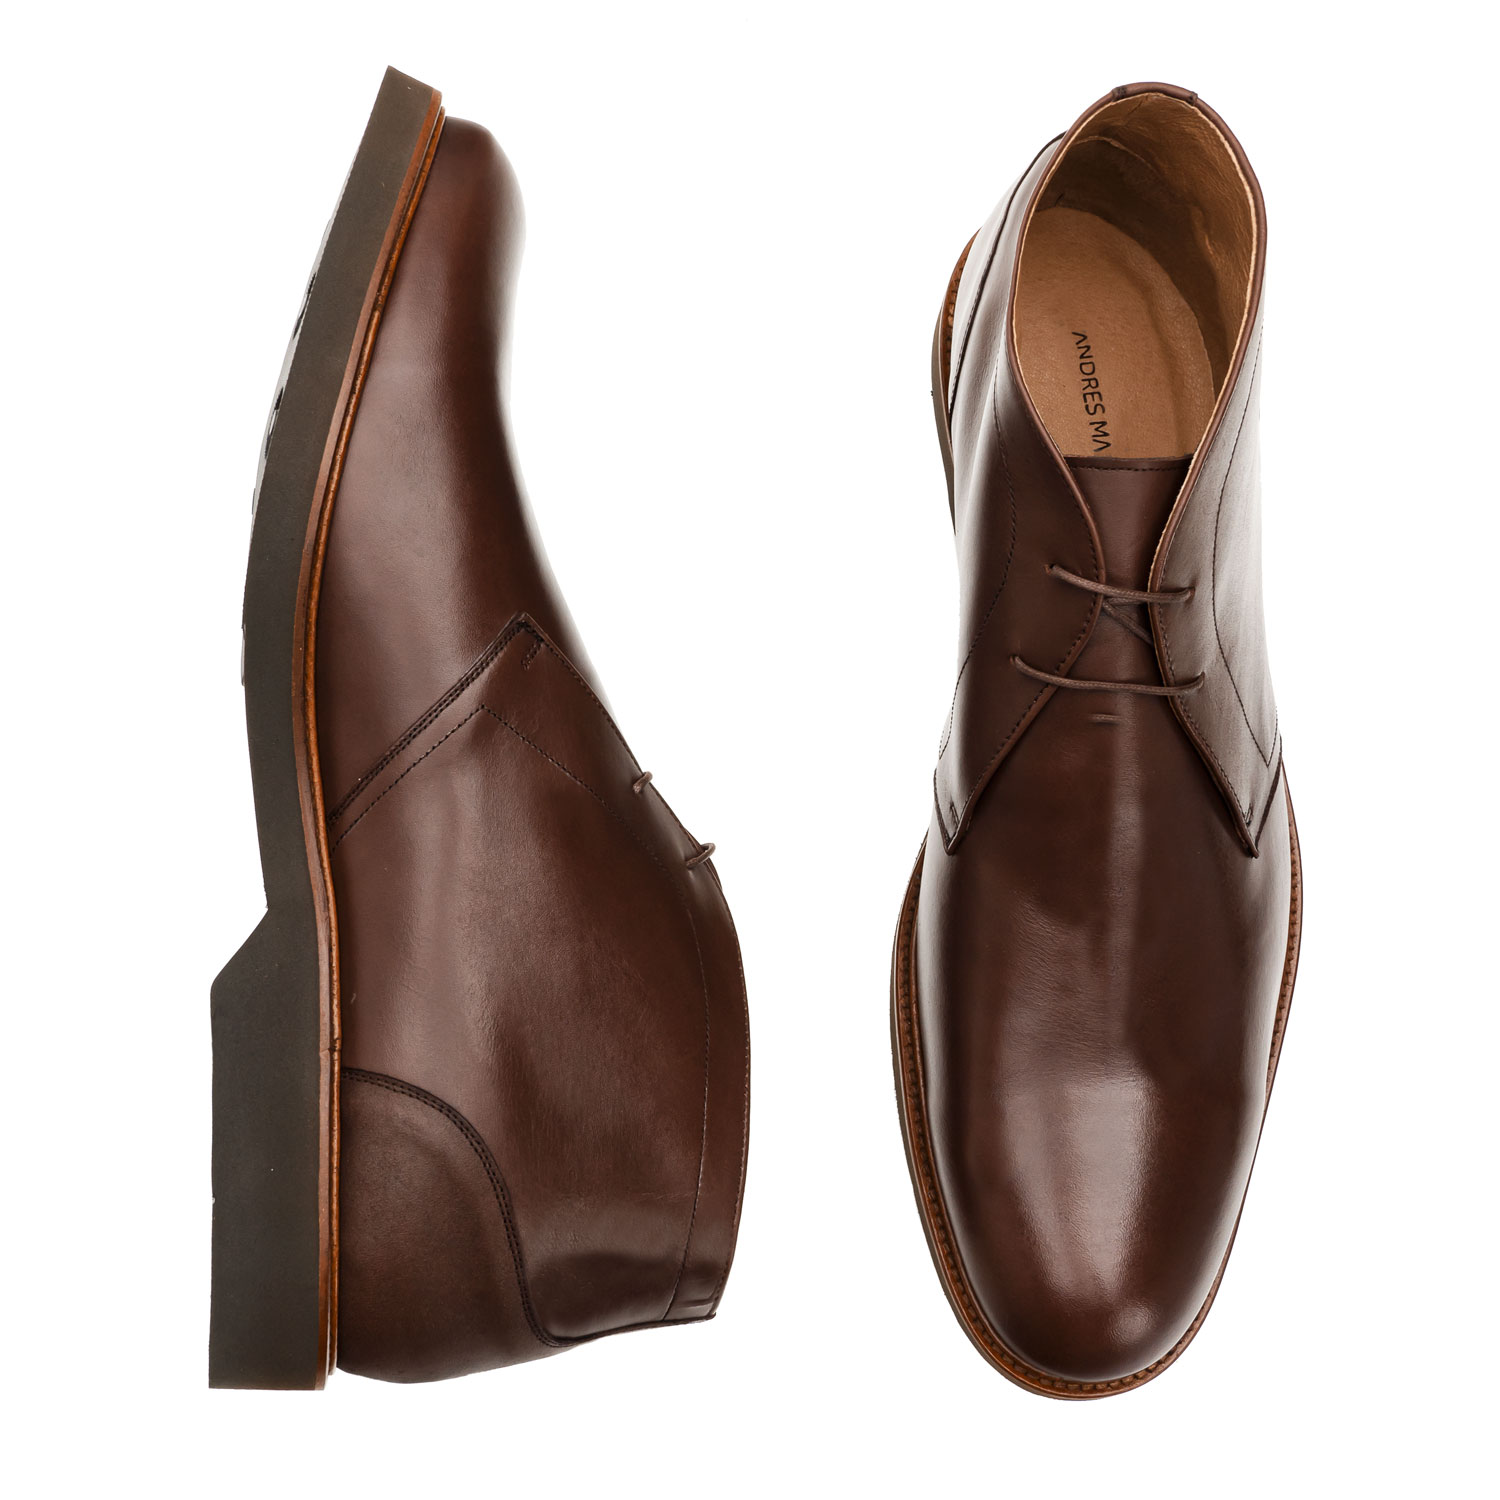 Men's Ankle Boots in Brown Leather 